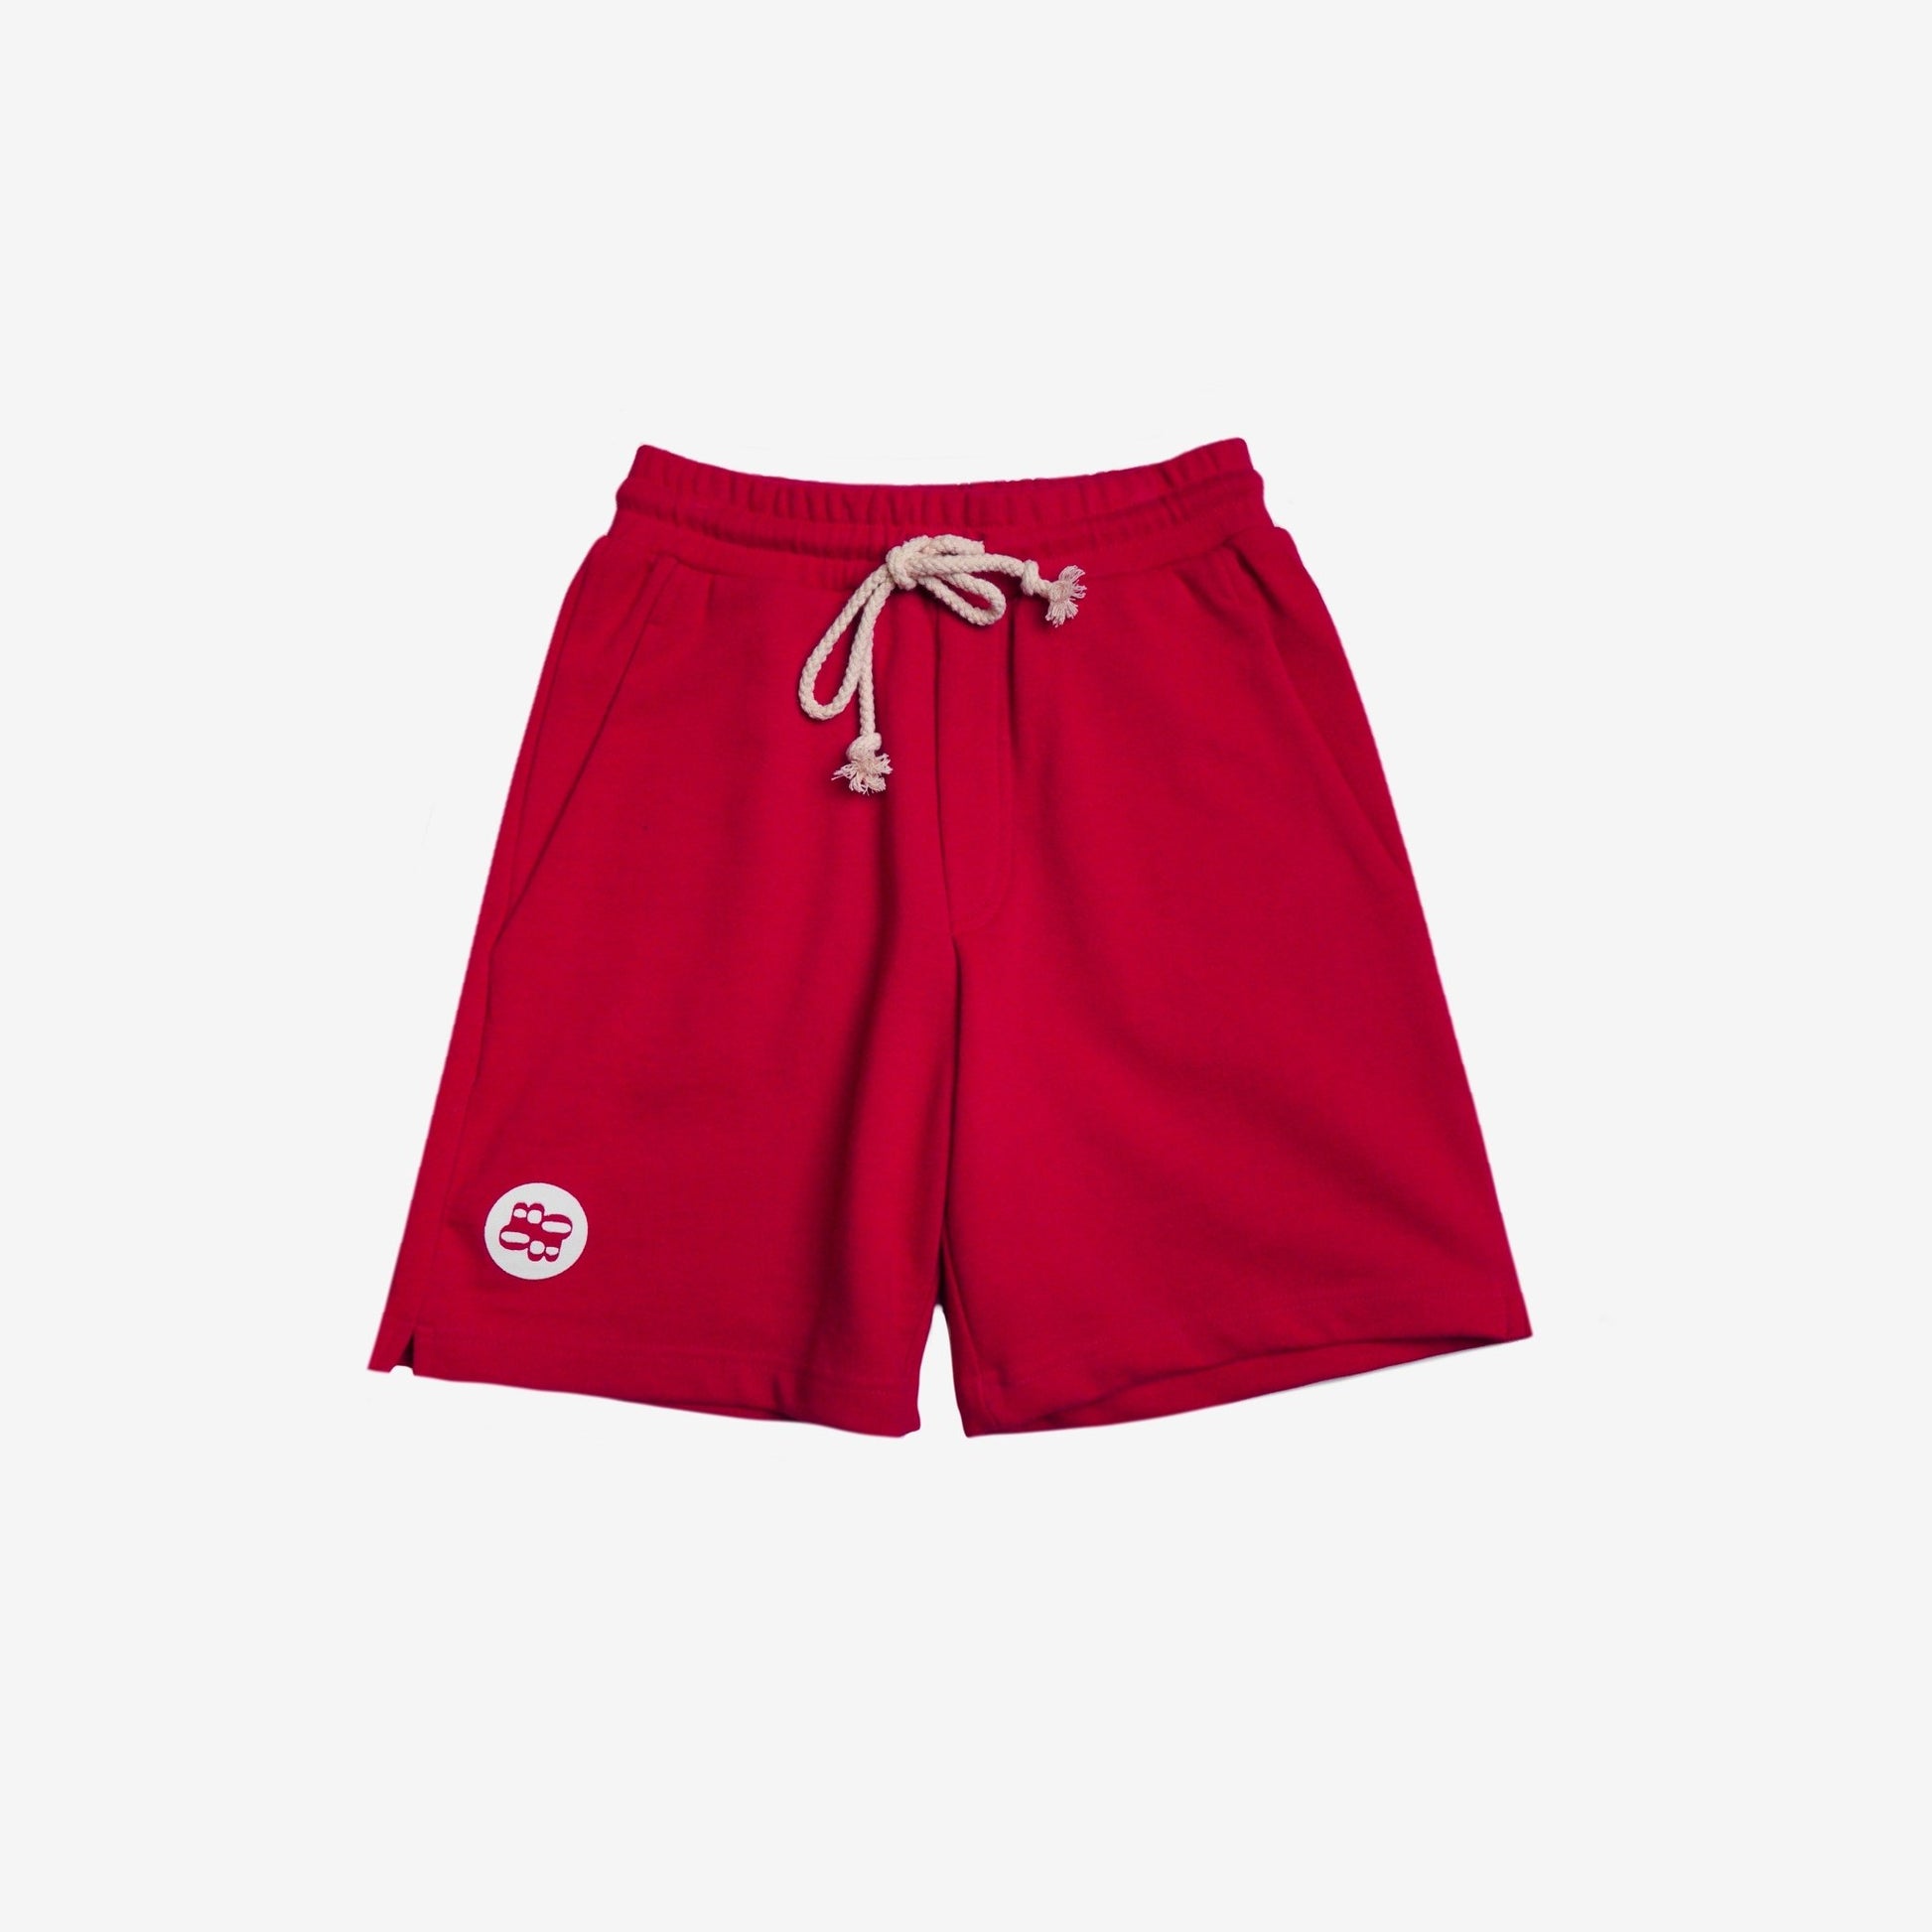 RED SHORTS - Bluorng